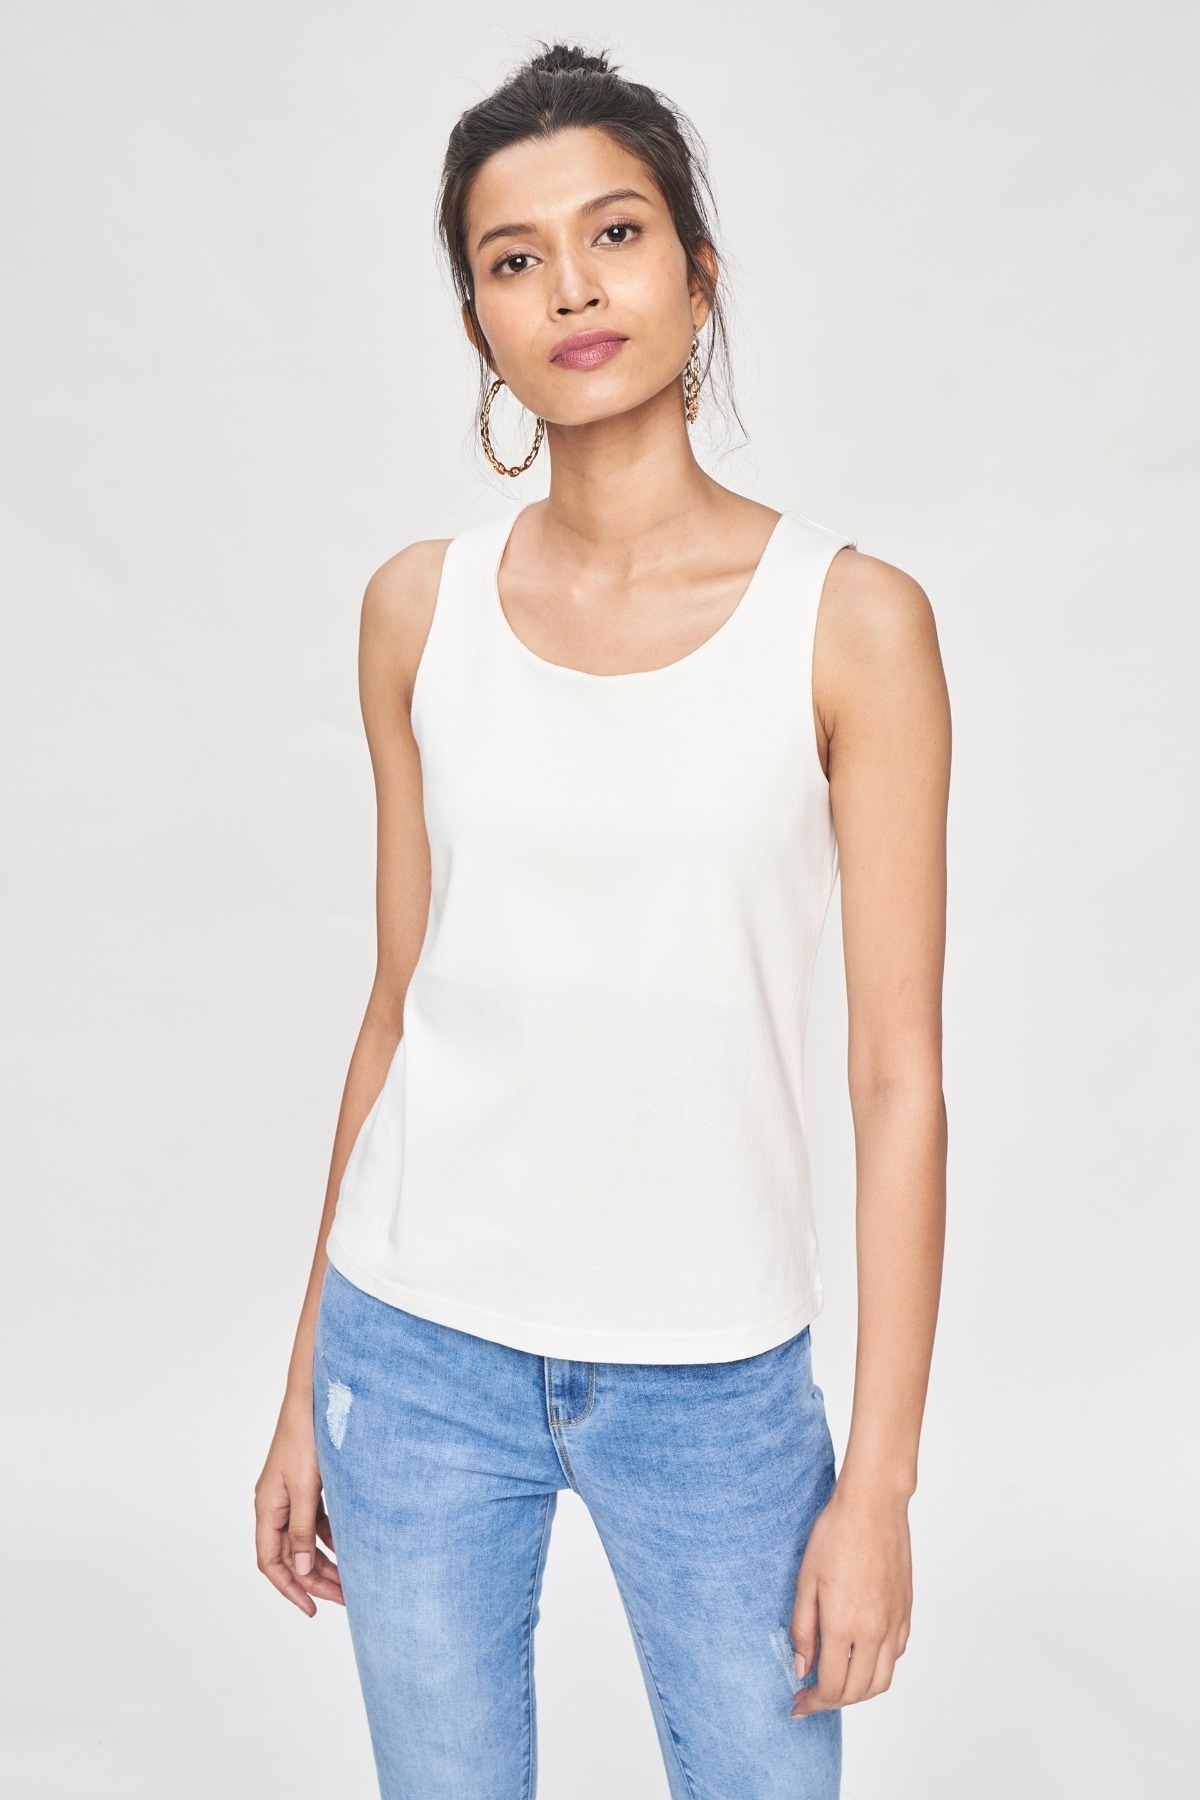 AND | AND WHITE TOP 0